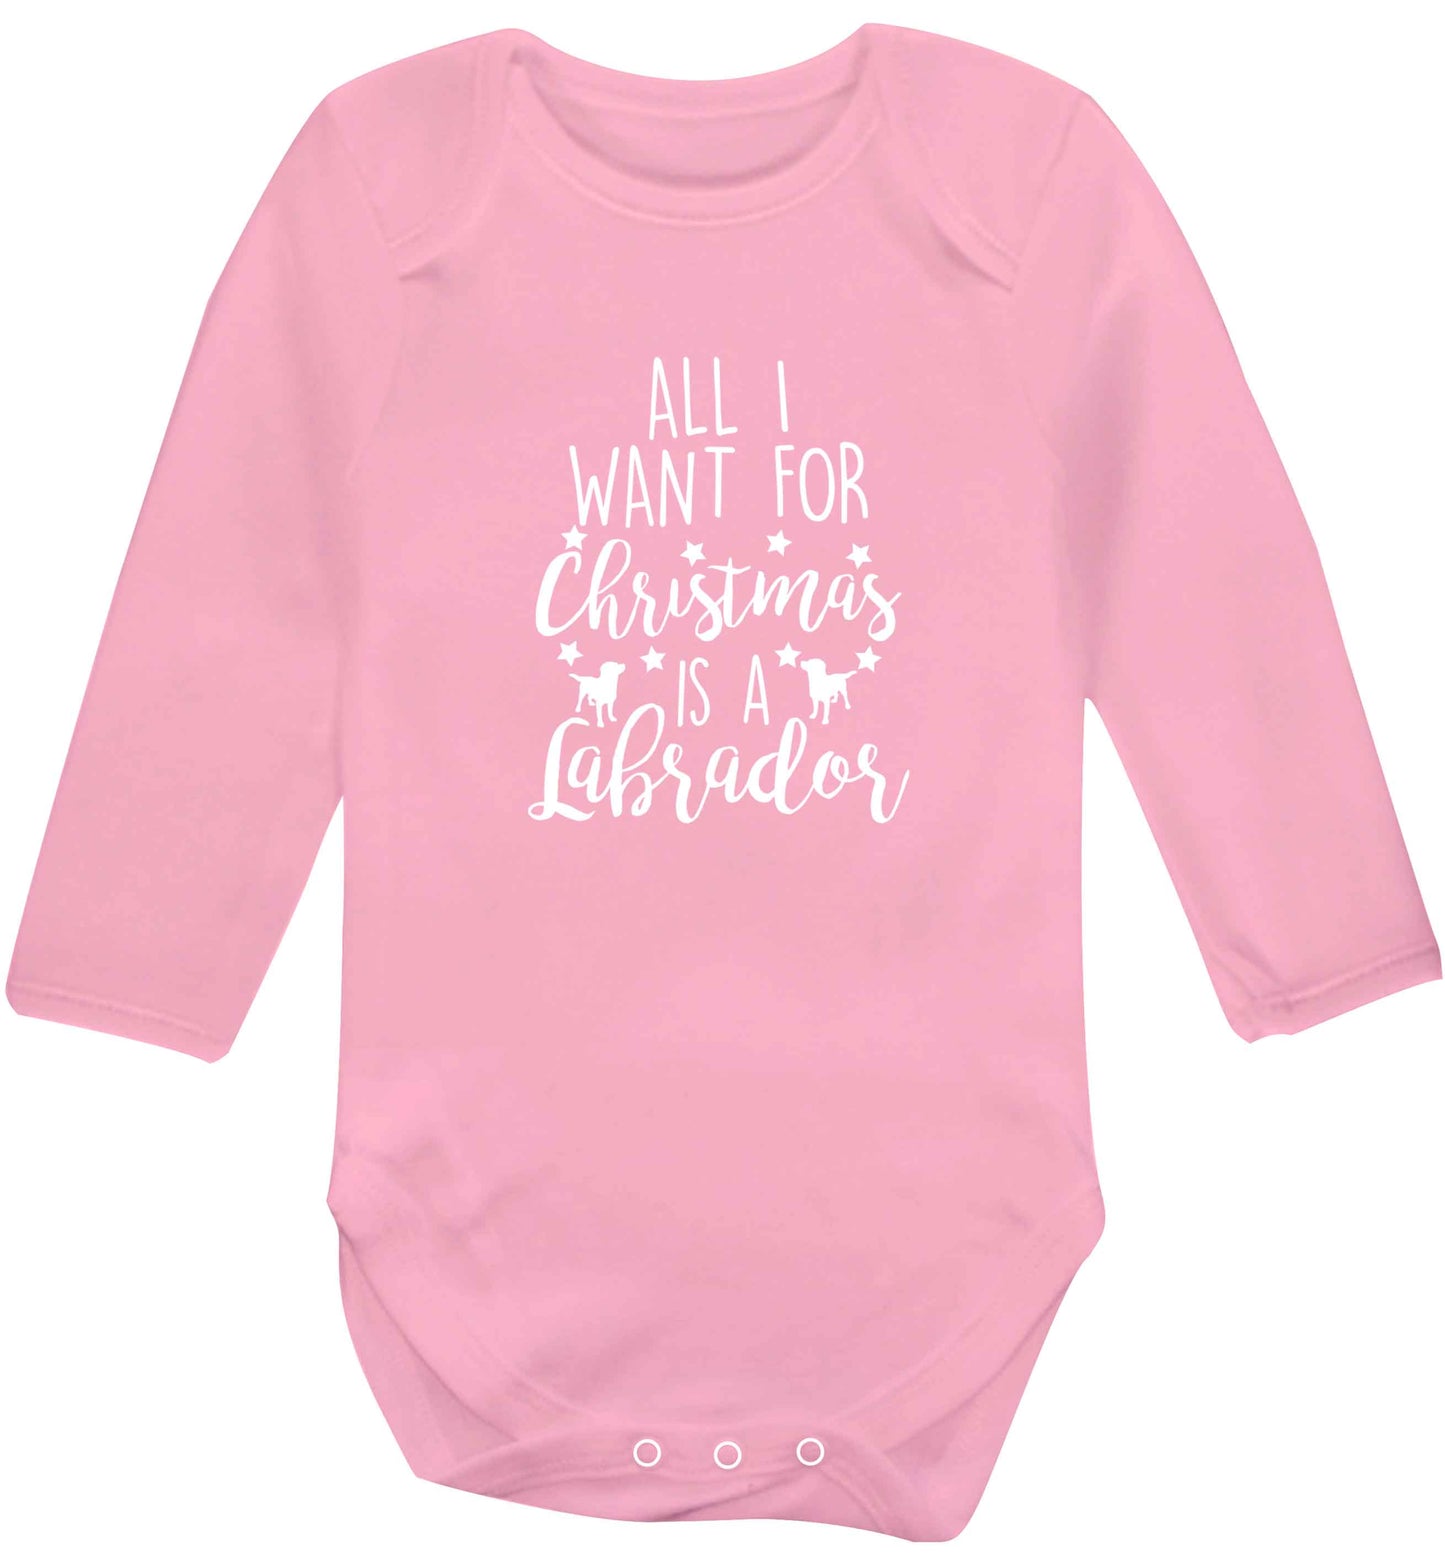 All I want for Christmas is a labrador baby vest long sleeved pale pink 6-12 months